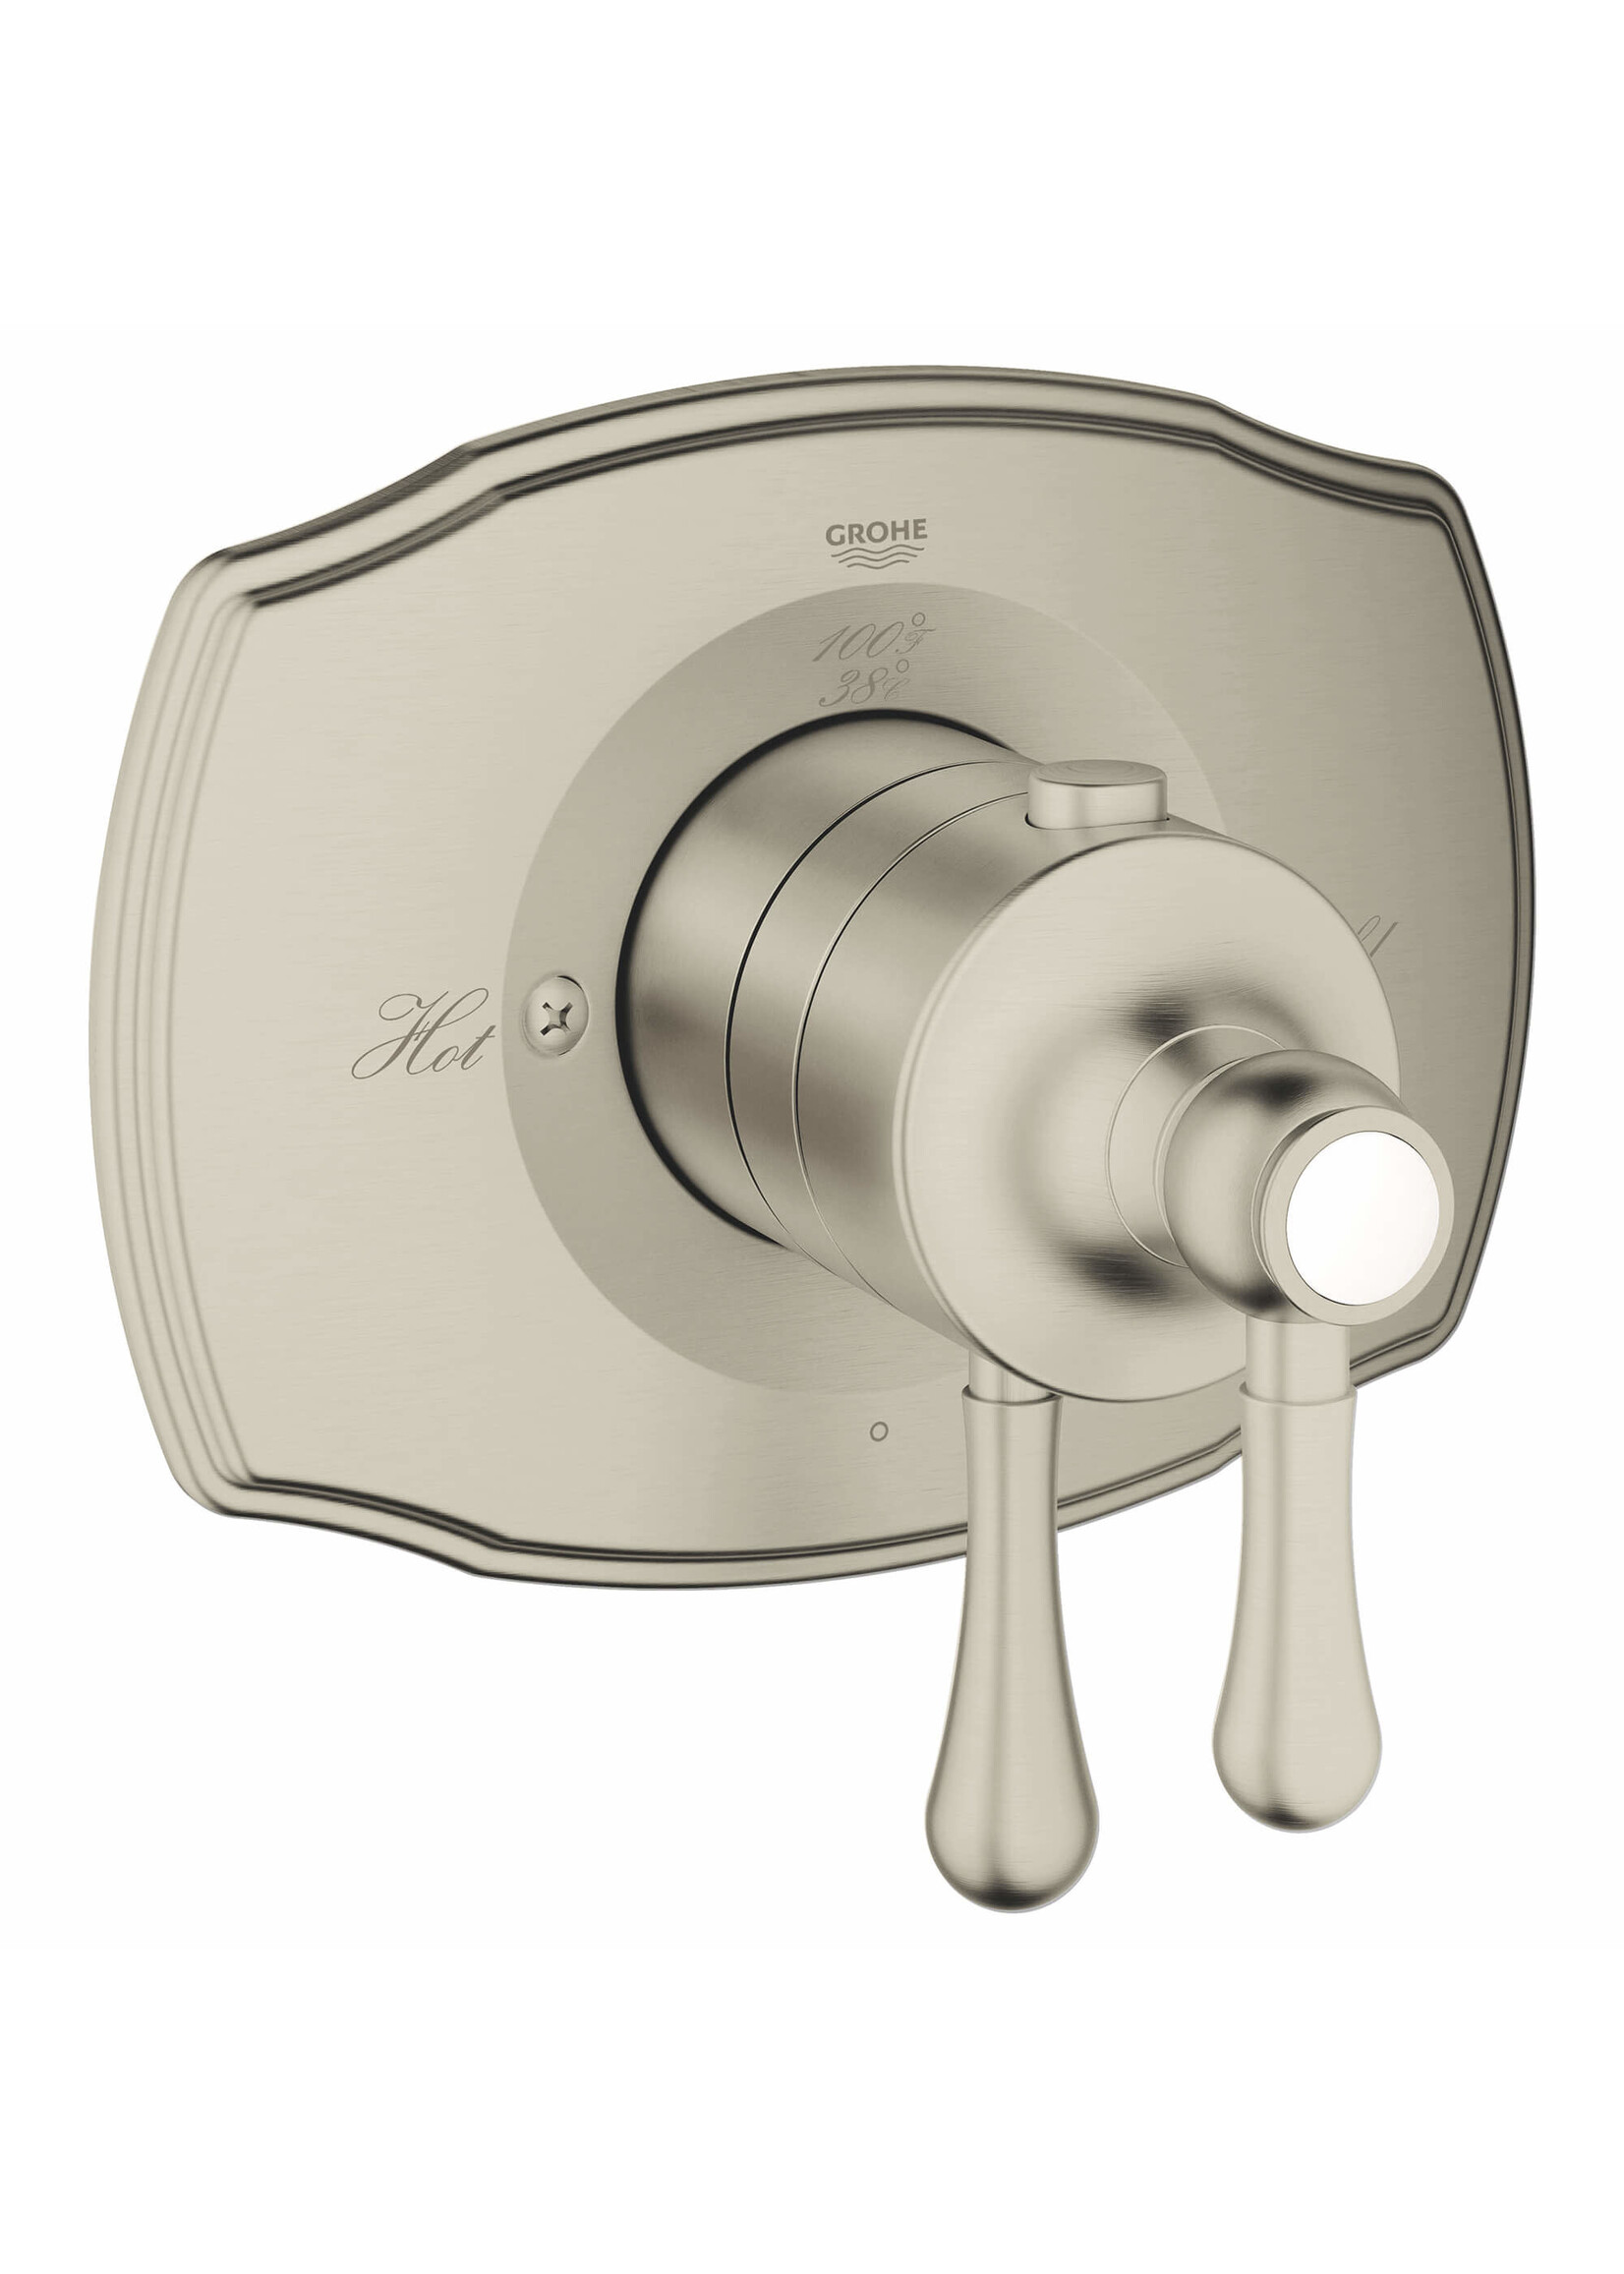 Grohe Grohe Grohflex® Authentic Sigrohe Grohflex® Authentic Single Function Thermostatic Trim Bru. Nickel